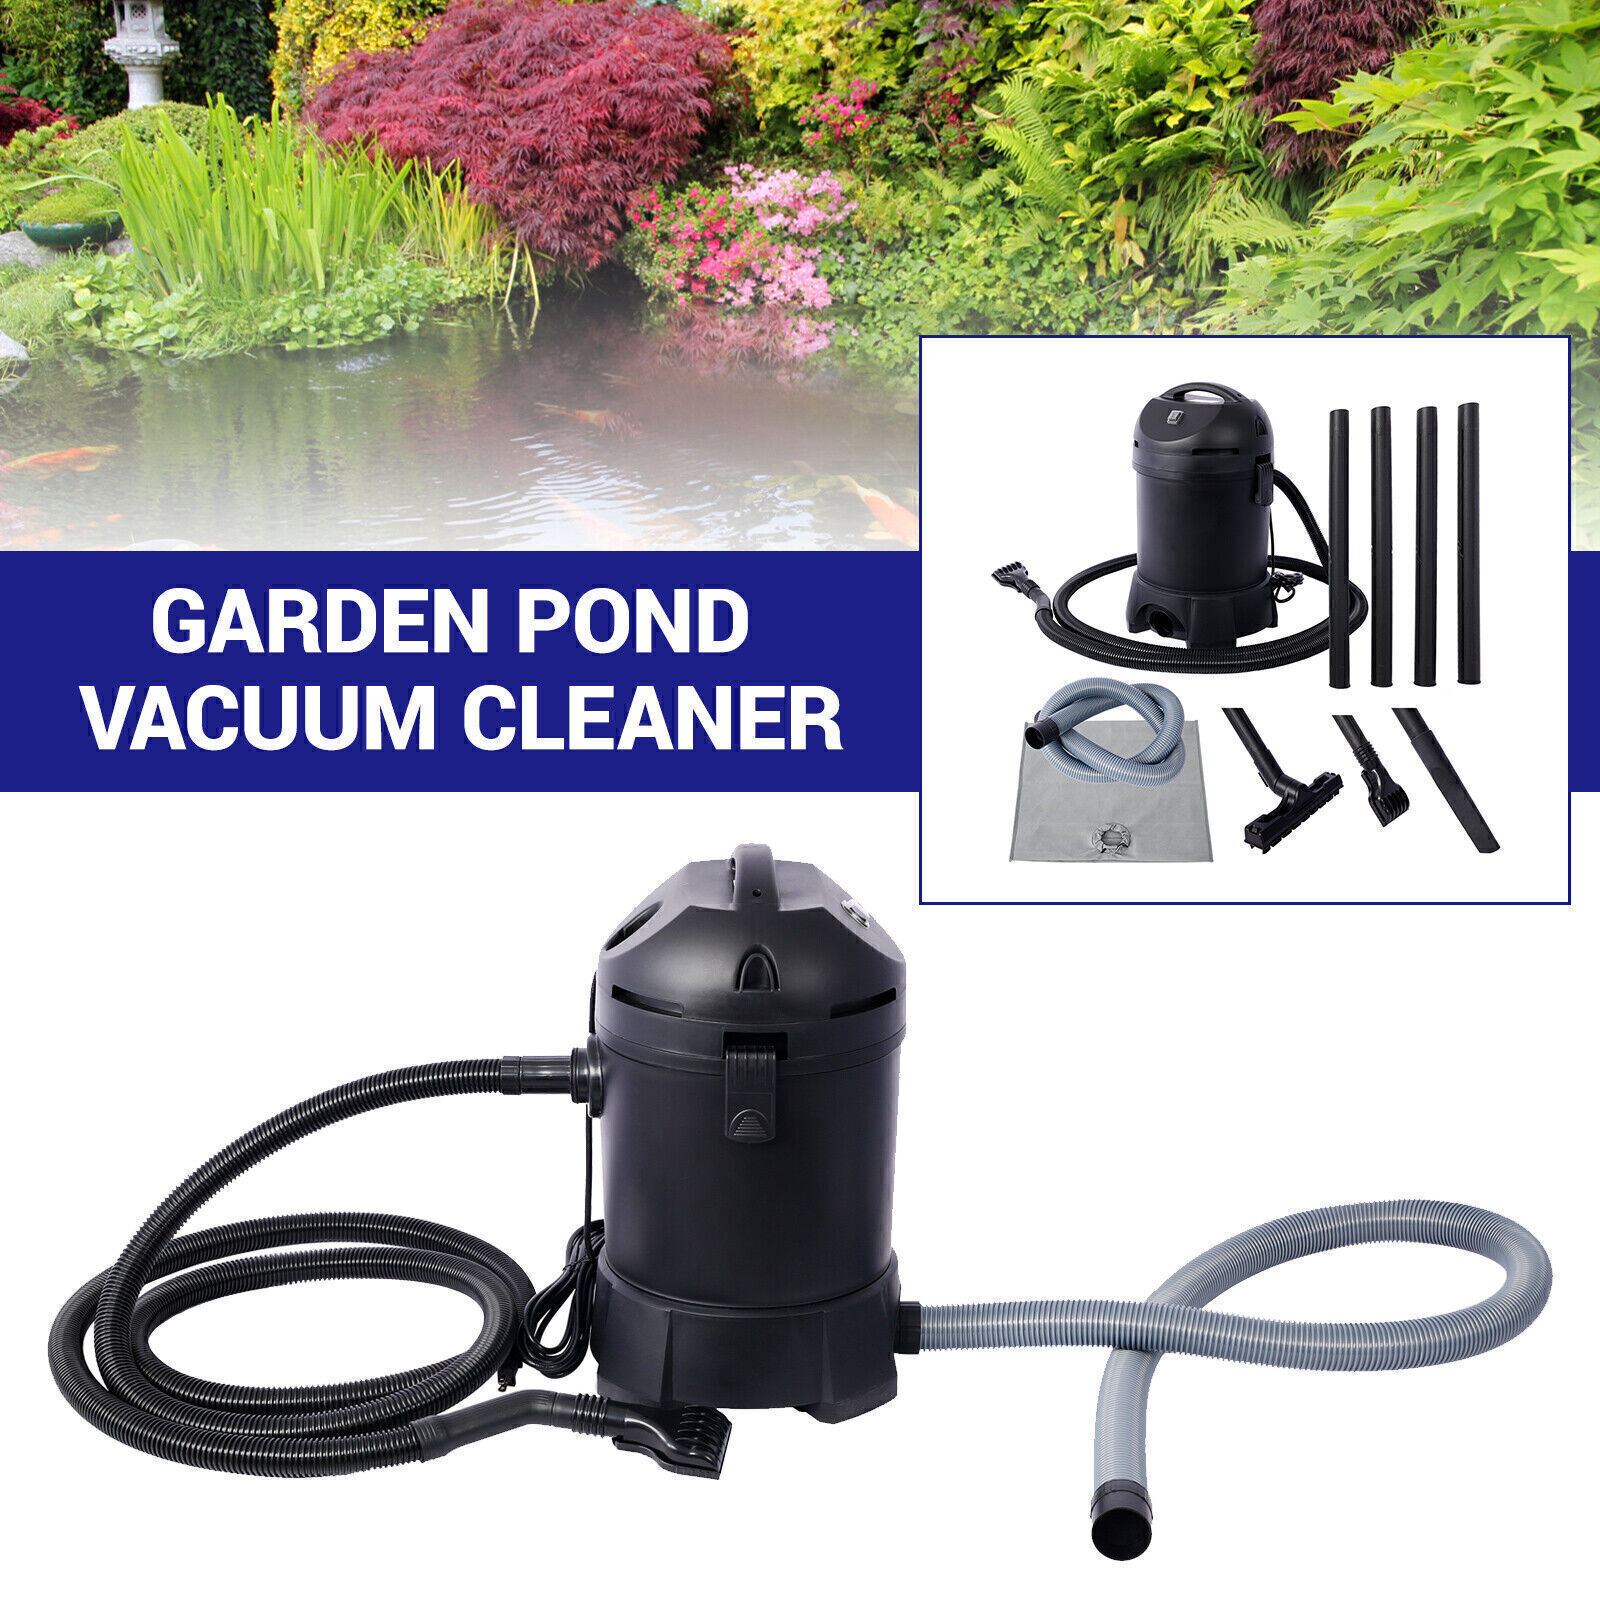 1400W Pond Vacuum Cleaner Sludge Vacuum Continuous Intermittent Cycle Auto-stop Unbranded Does Not Apply